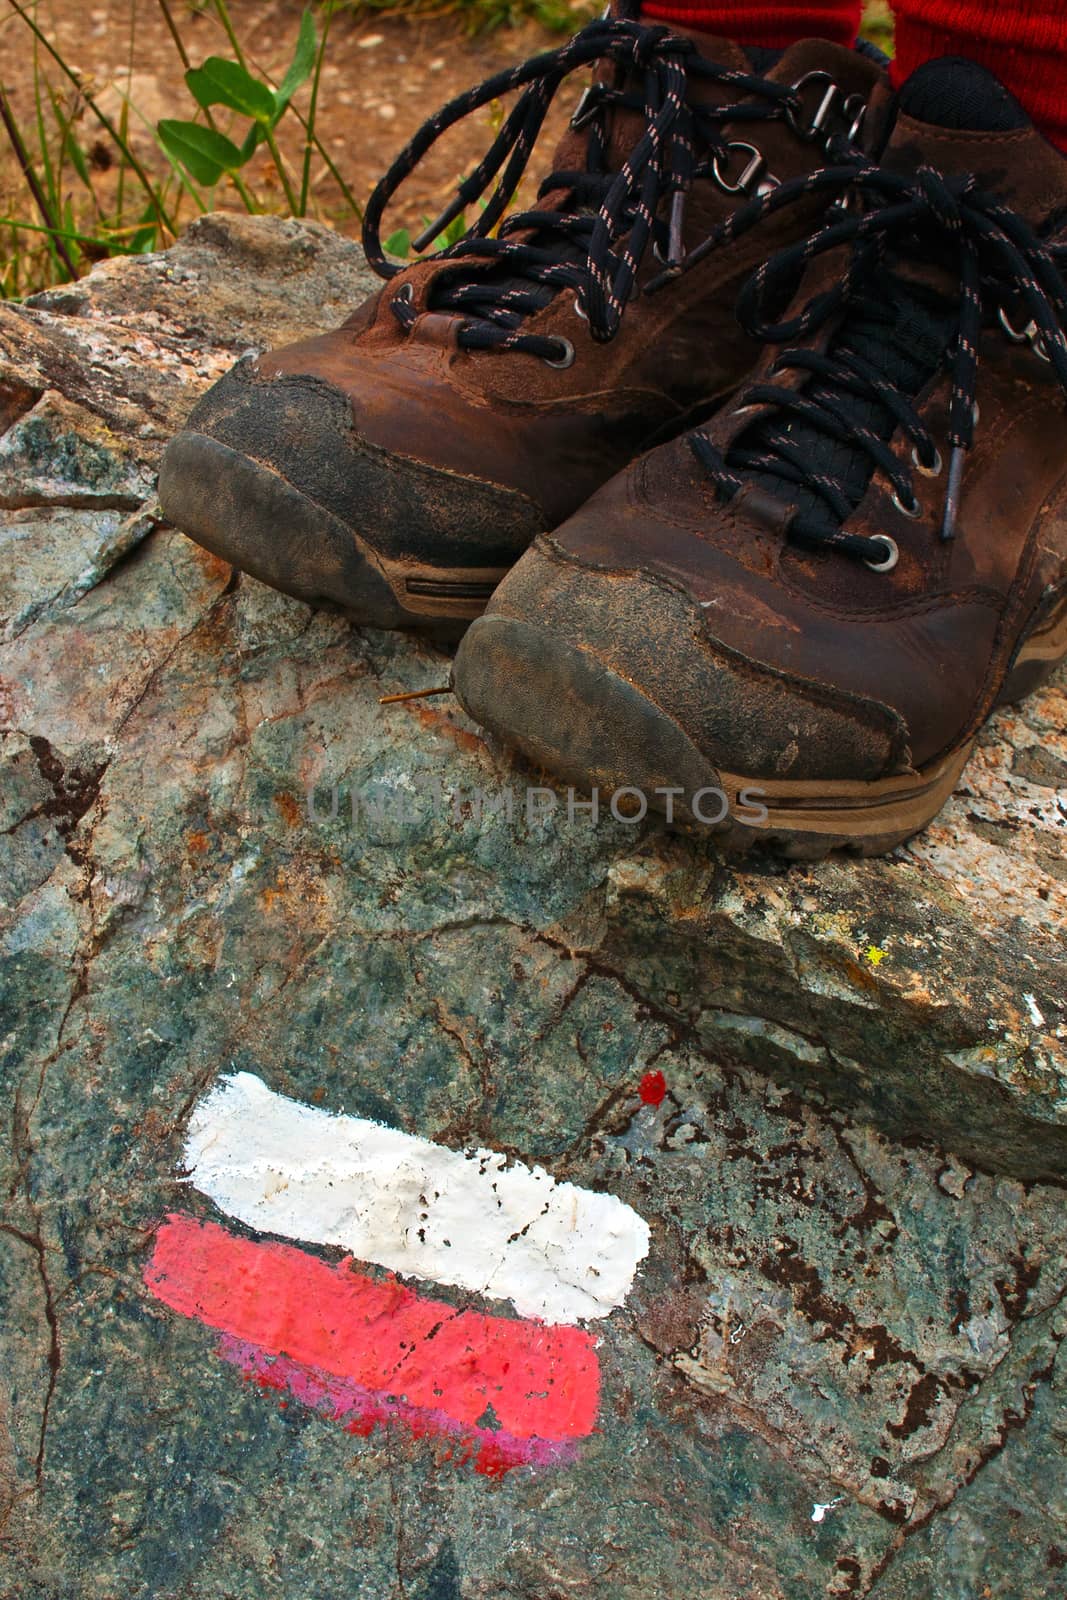 Trail Marker and Boots by Kartouchken